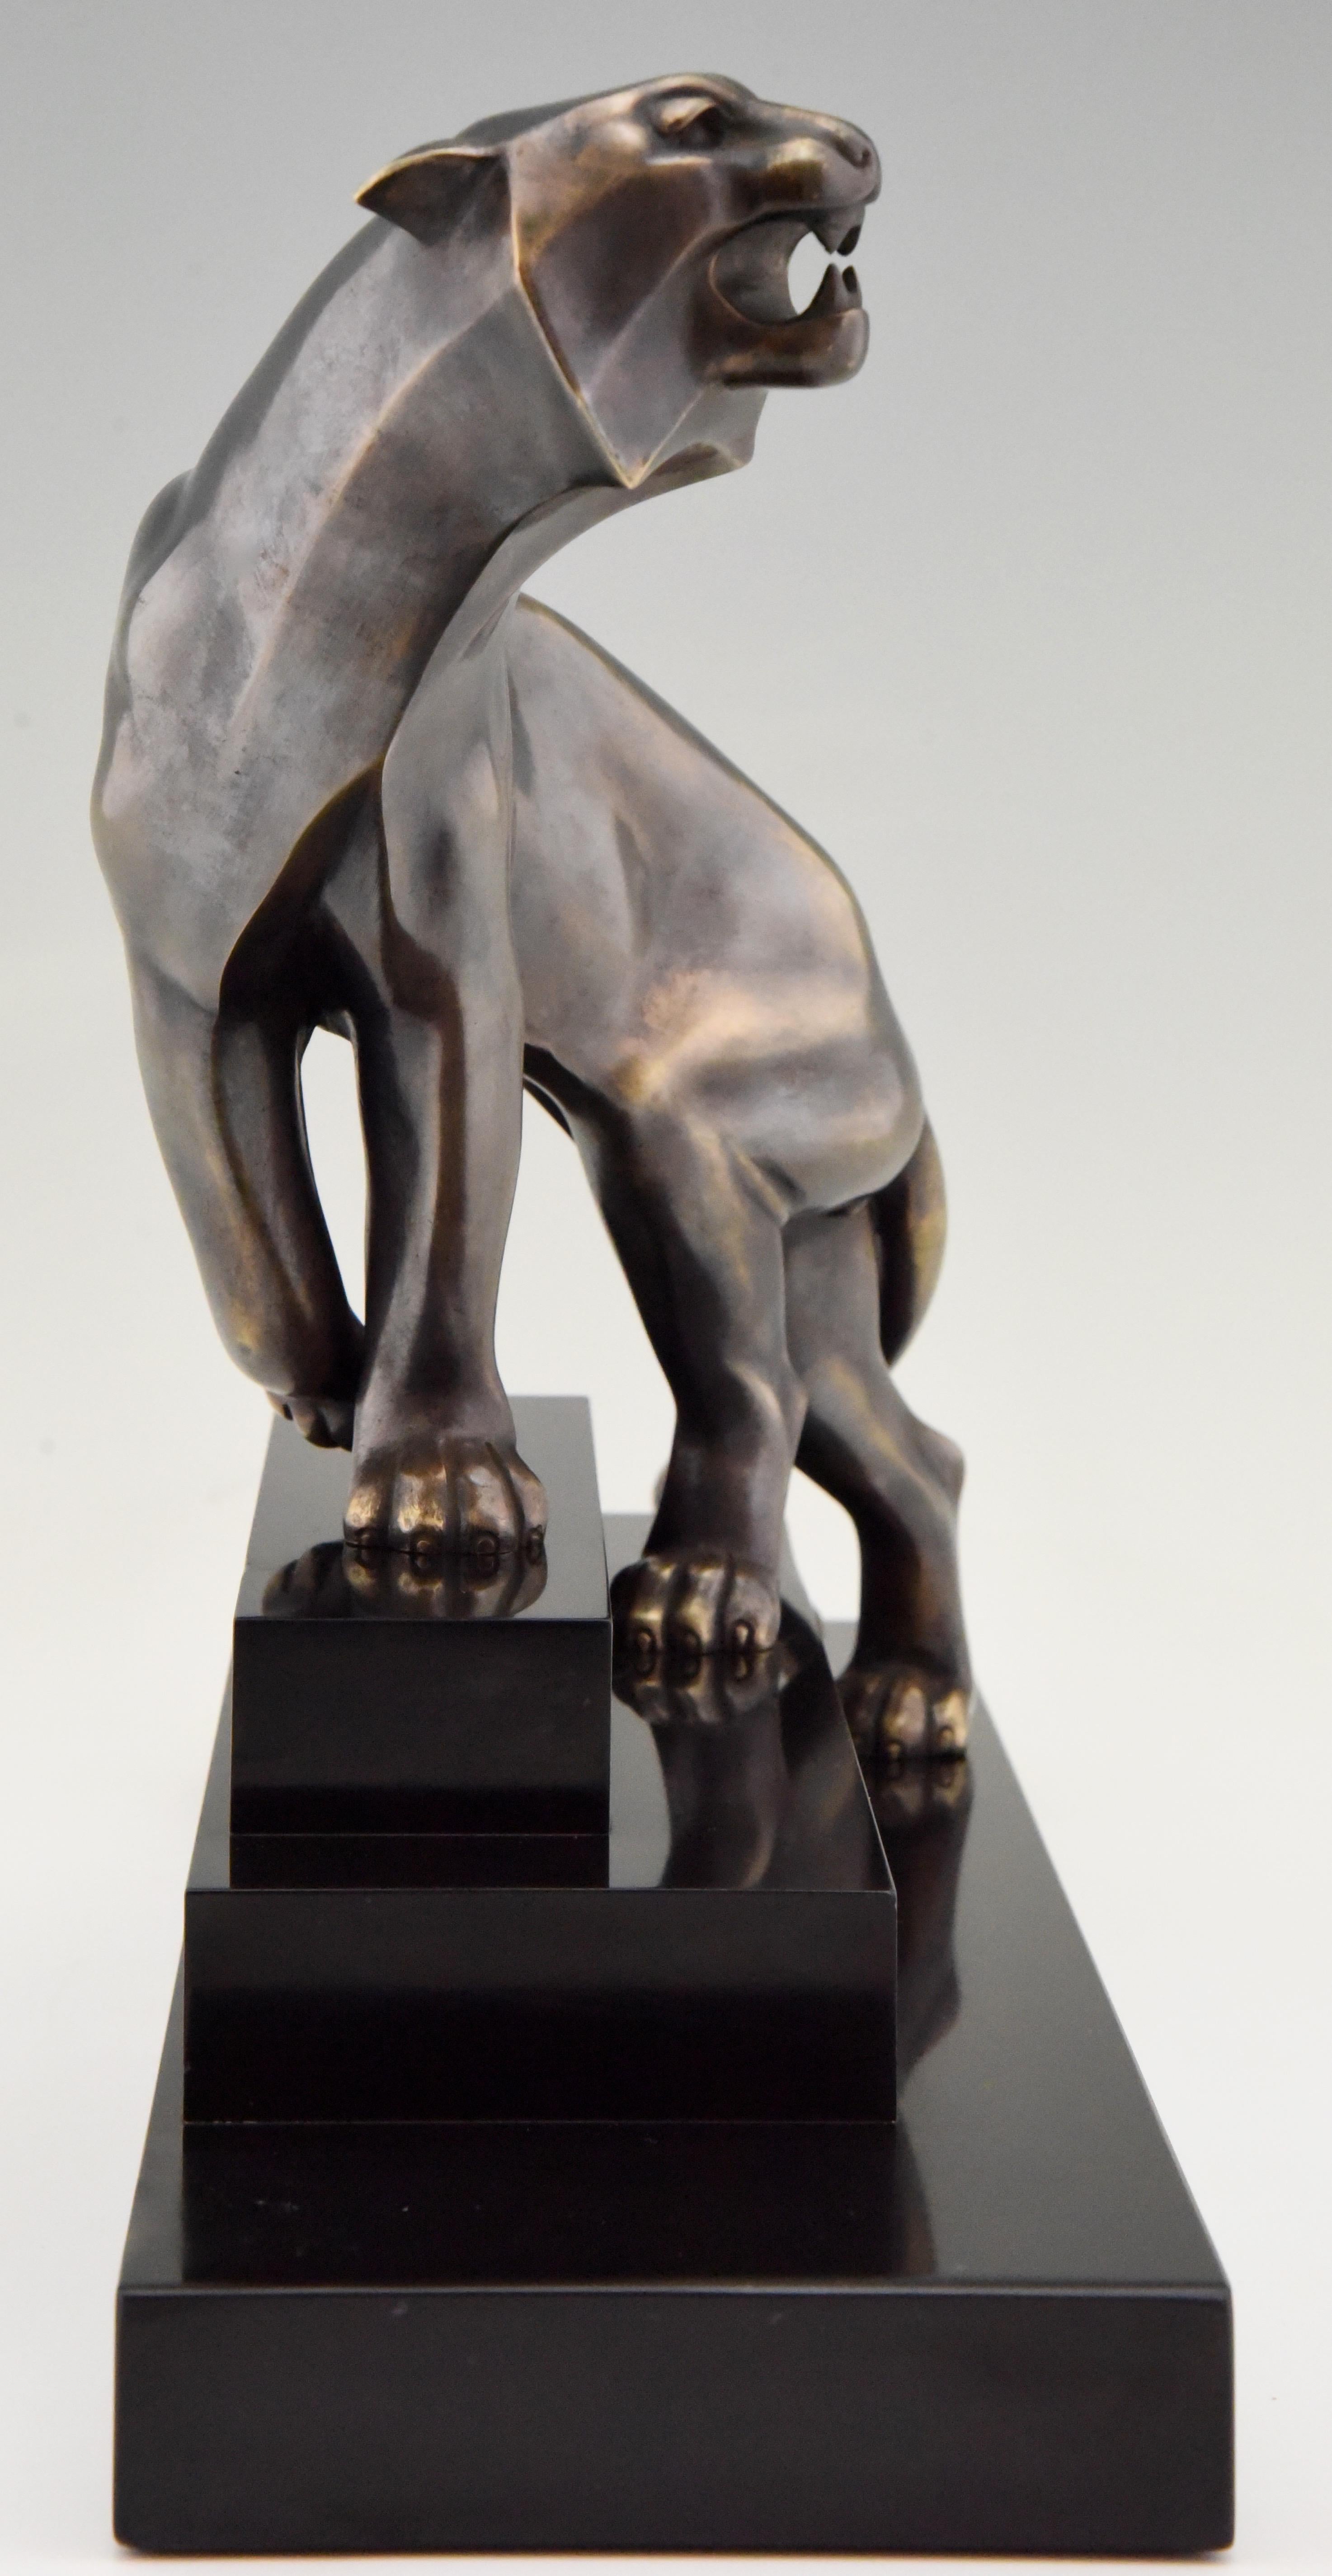 Beautiful Art Deco bronze sculpture of a panther by Georges Lavroff on a stepped Belgian black marble base, France, 1925. The artist was born in Russia in 1895, he lived and worked in France. Work in Musea and private collections.

This panther is